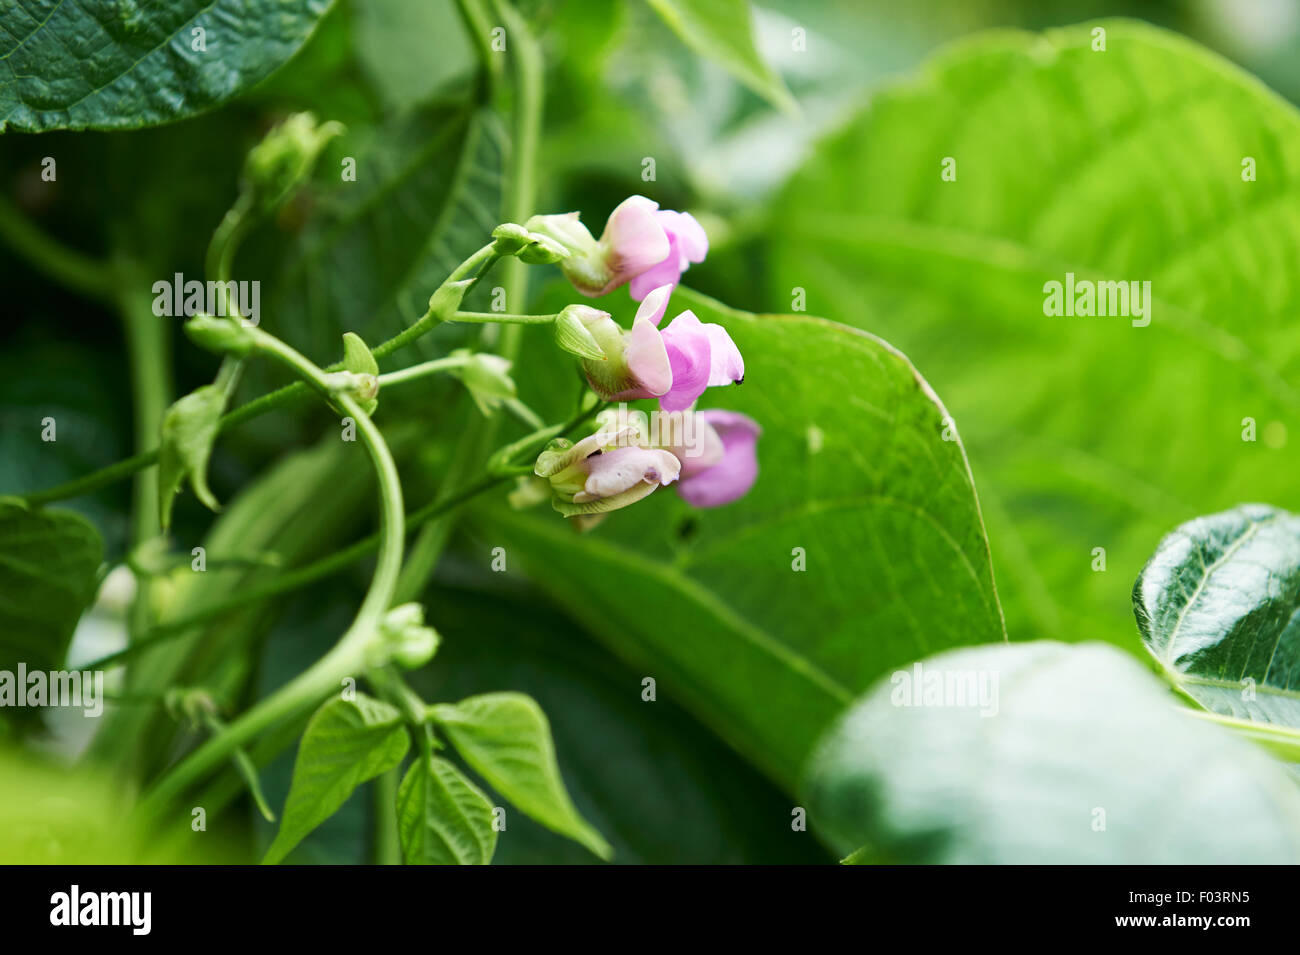 Green Bean plants with pink flowers growing up a cane wigwam in a vegetable garden. Stock Photo